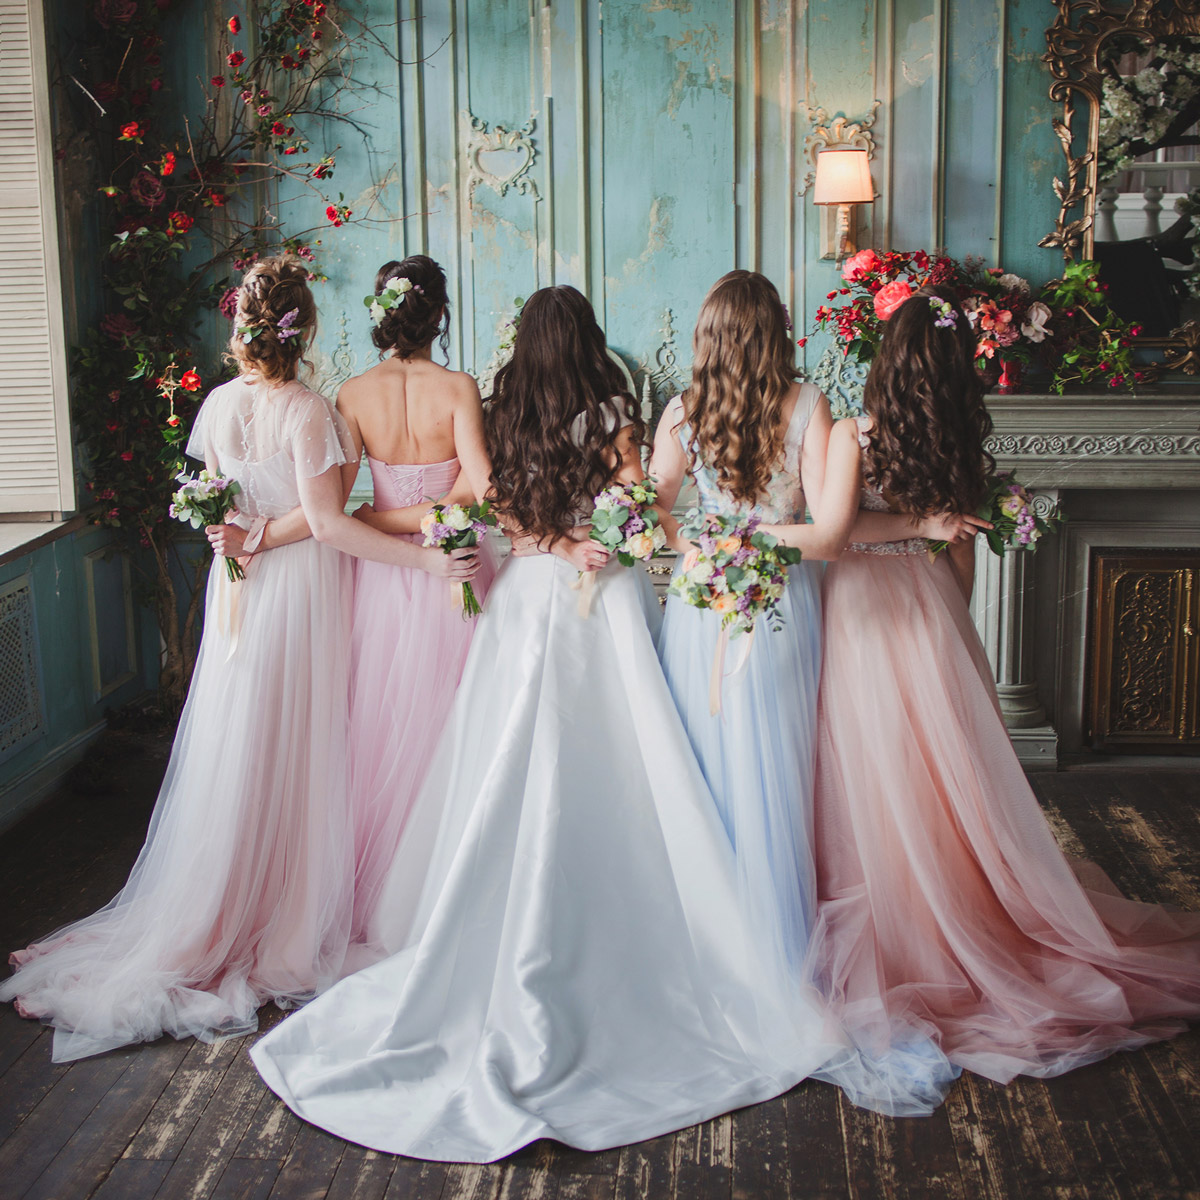 A Guide to Picking Bridal Party Outfits for Your Wedding Day